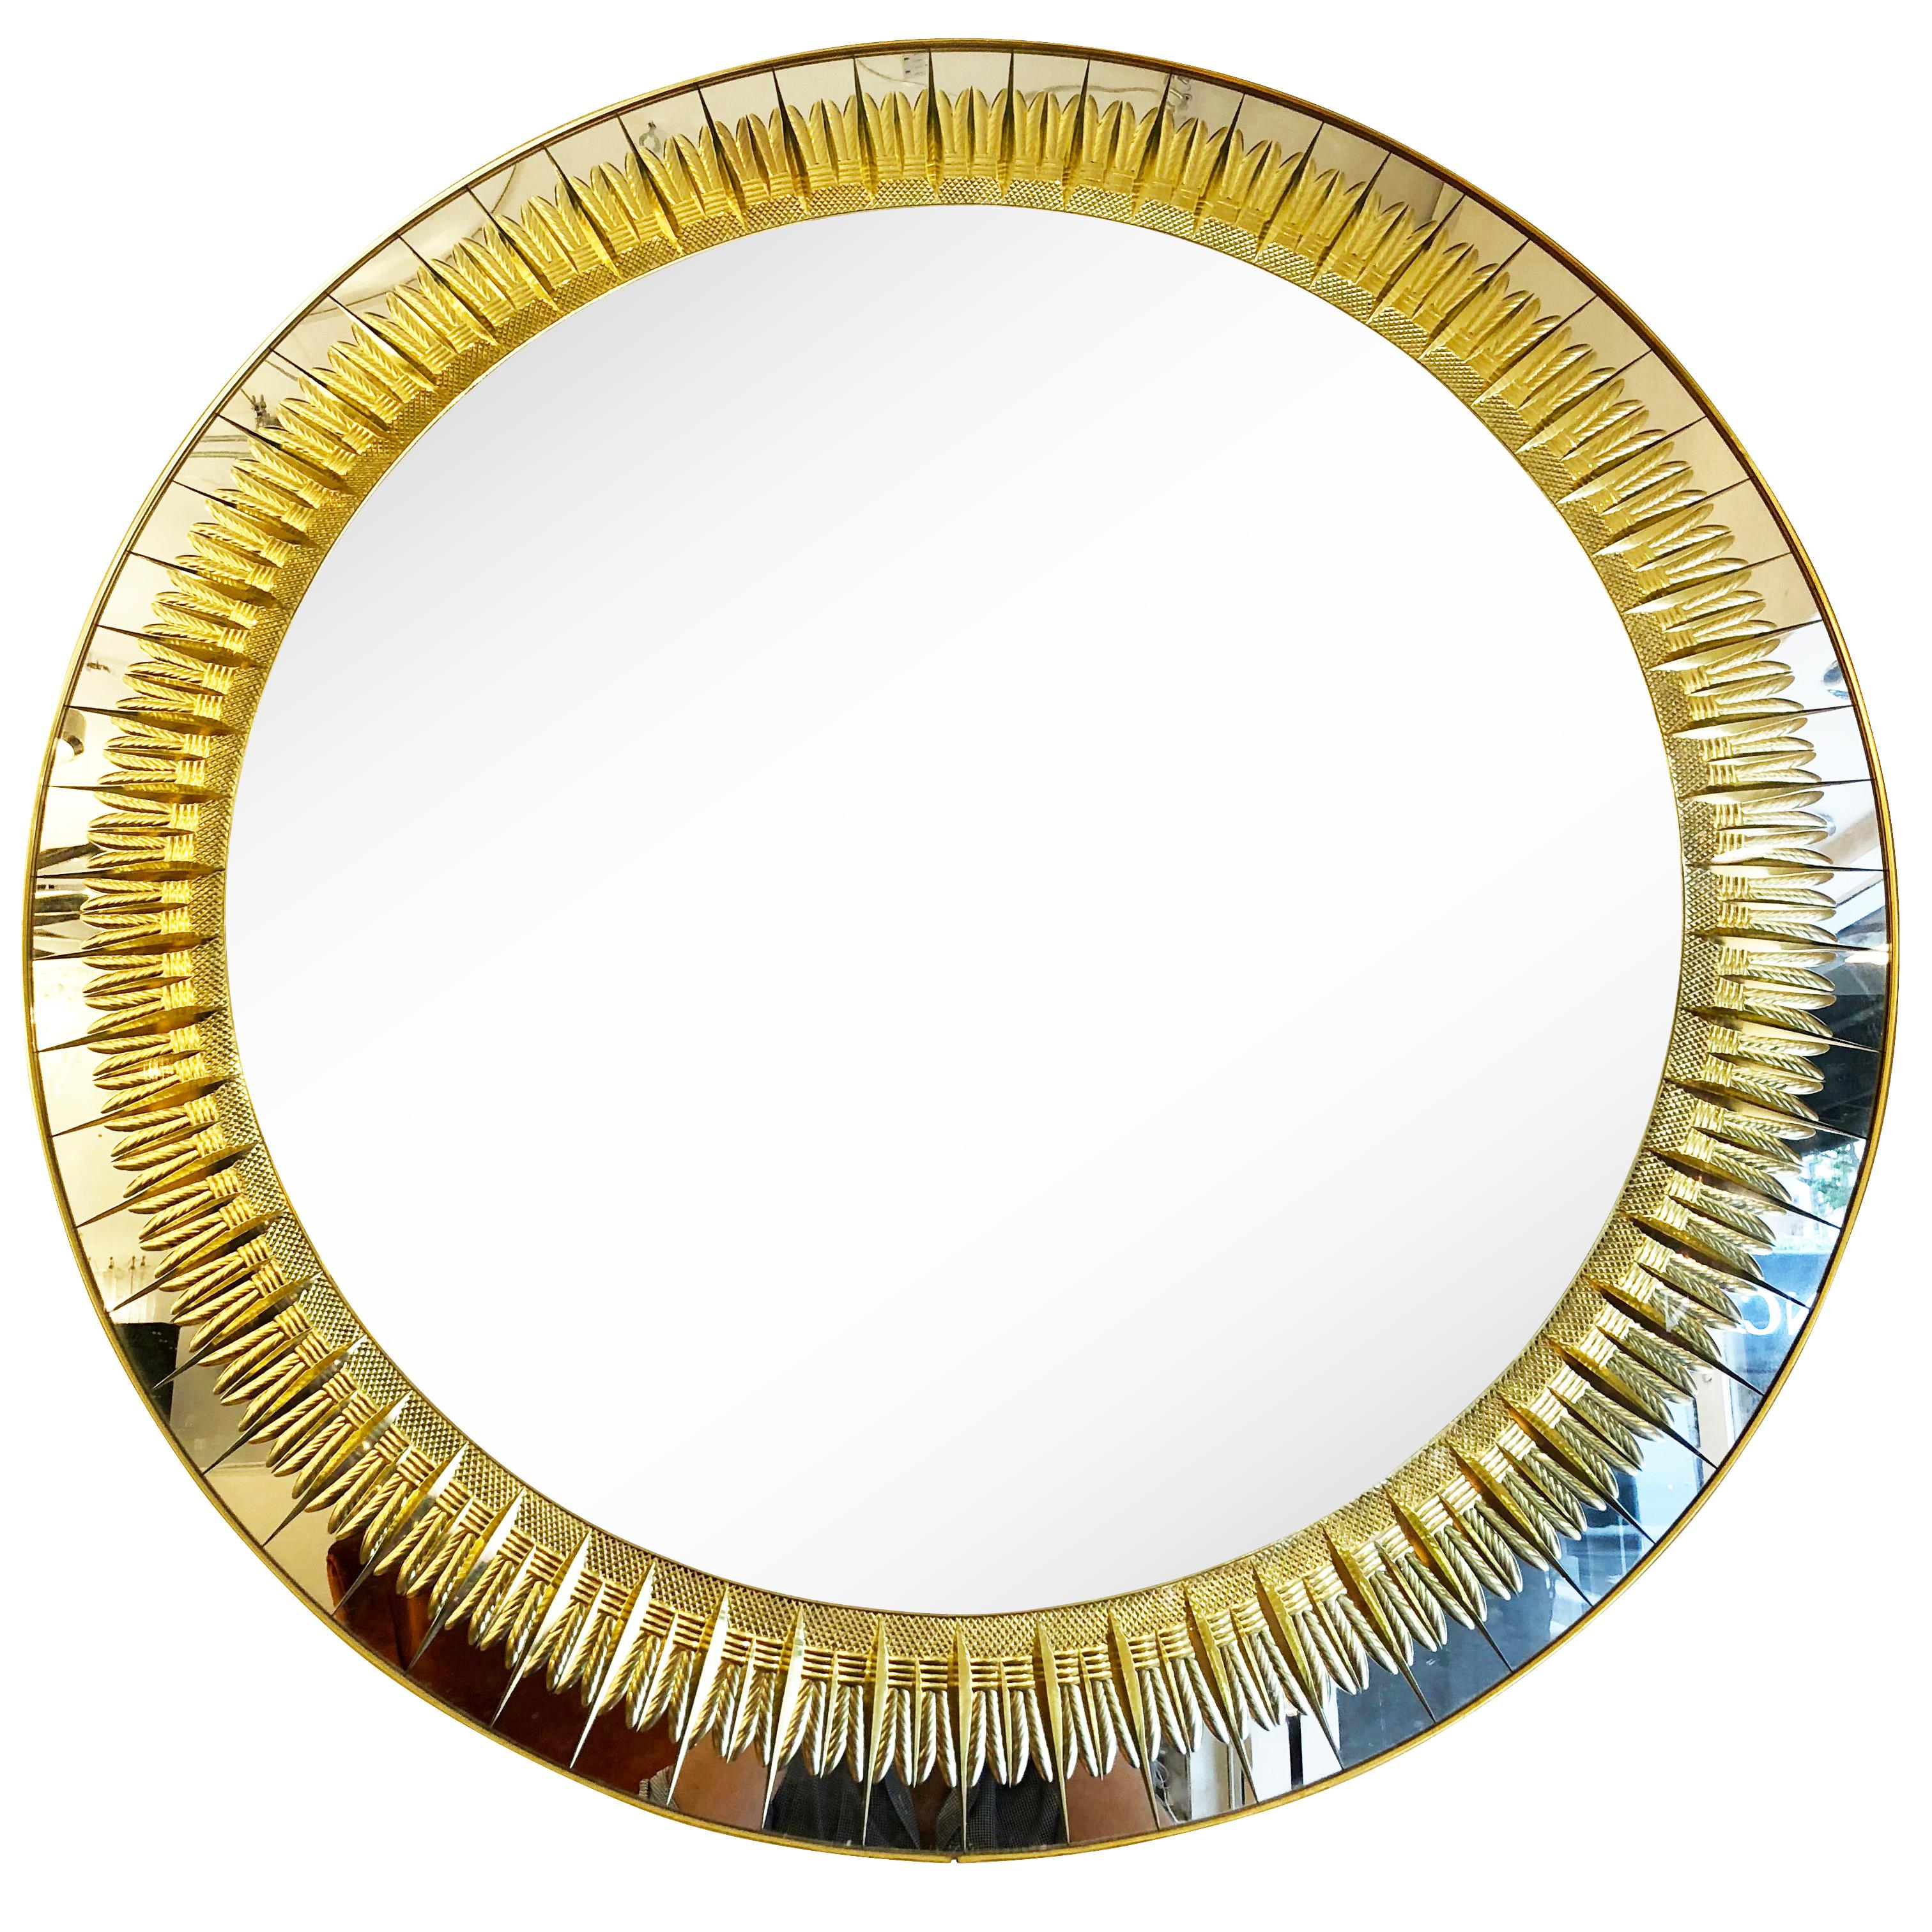 Large round midcentury mirror by Cristal Art with gold decorative engraving. The edge is brass and the frame wood.

Condition: Excellent vintage condition, minor wear consistent with age and use. Some age spots.

Measure: Diameter 39”

Depth